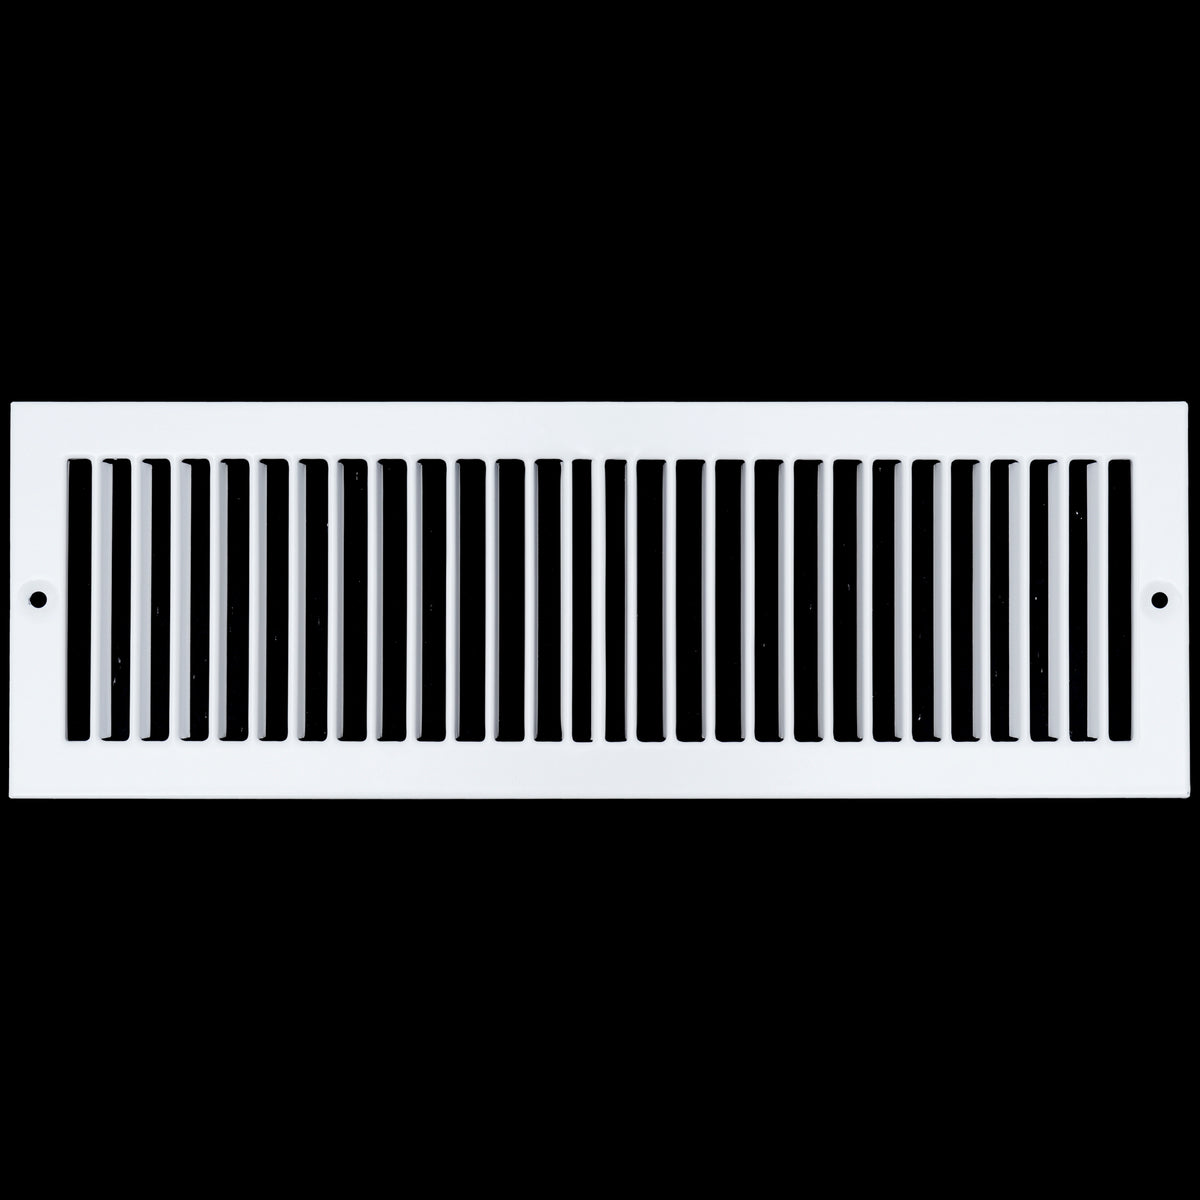 airgrilles 4" x 14" toe kick register grille vent cover outer dimensions: 5.5" x 15.5" white hnd-tgs-wh-4x14  1